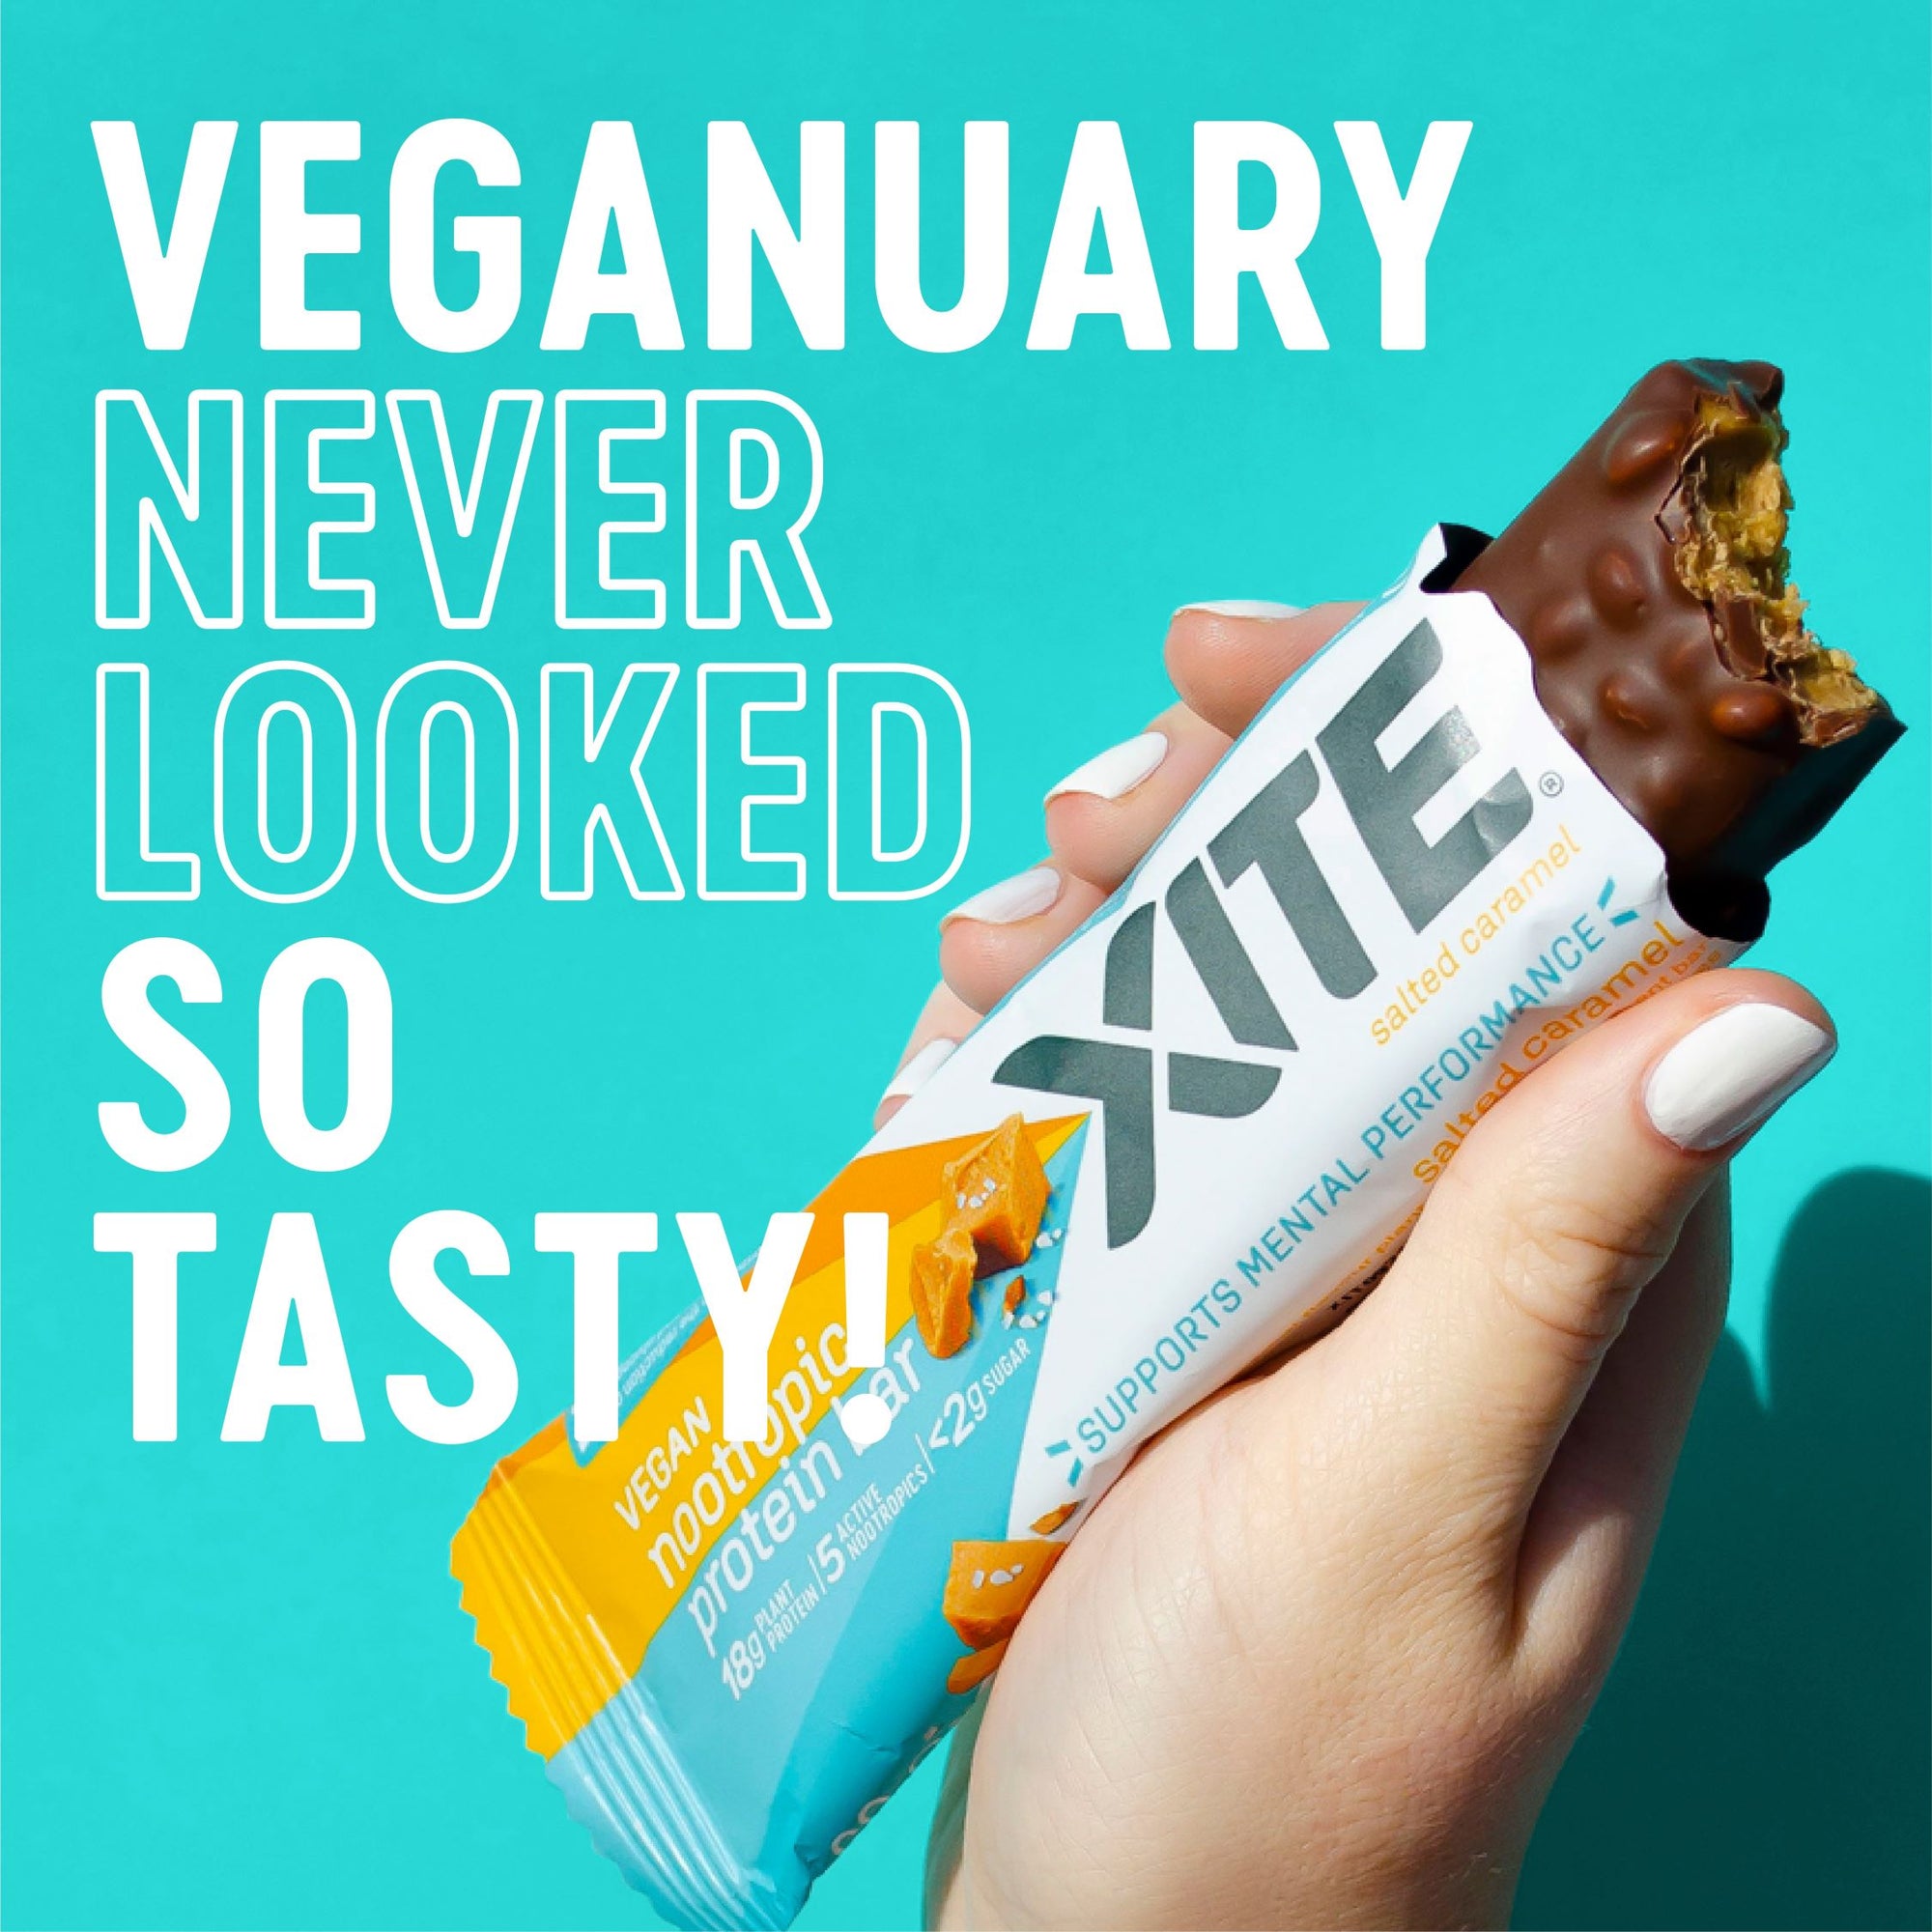 XITE Is Taking Part In The Veganuary Workplace Challenge